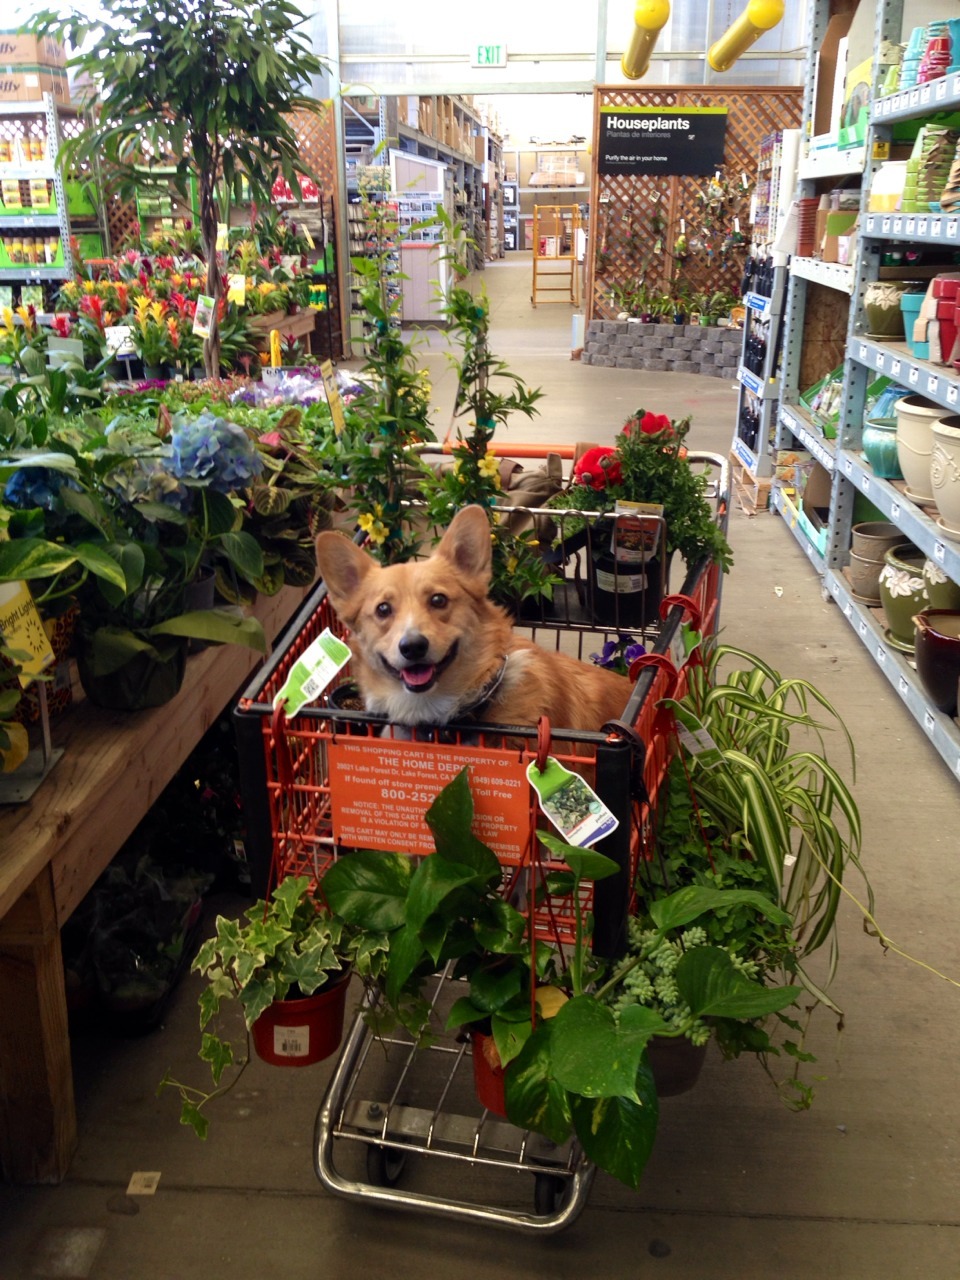 templetonthecorgi:  The idea is to put Templeton in the cart so I won’t buy so